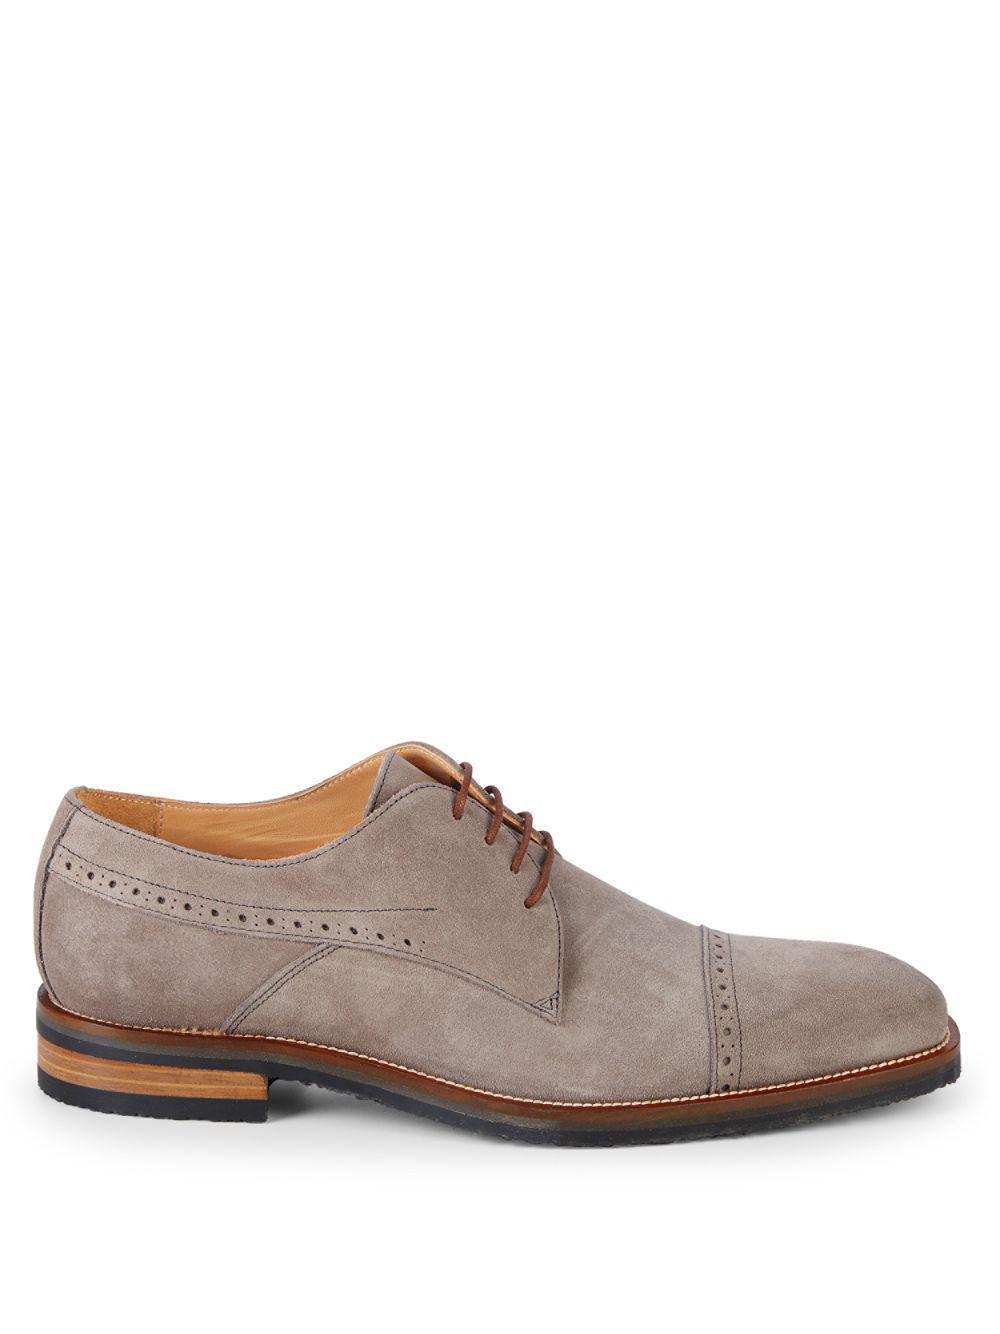 Saks Fifth Avenue Cap Toe Suede Derby Shoes in Grey (Gray) for Men - Lyst